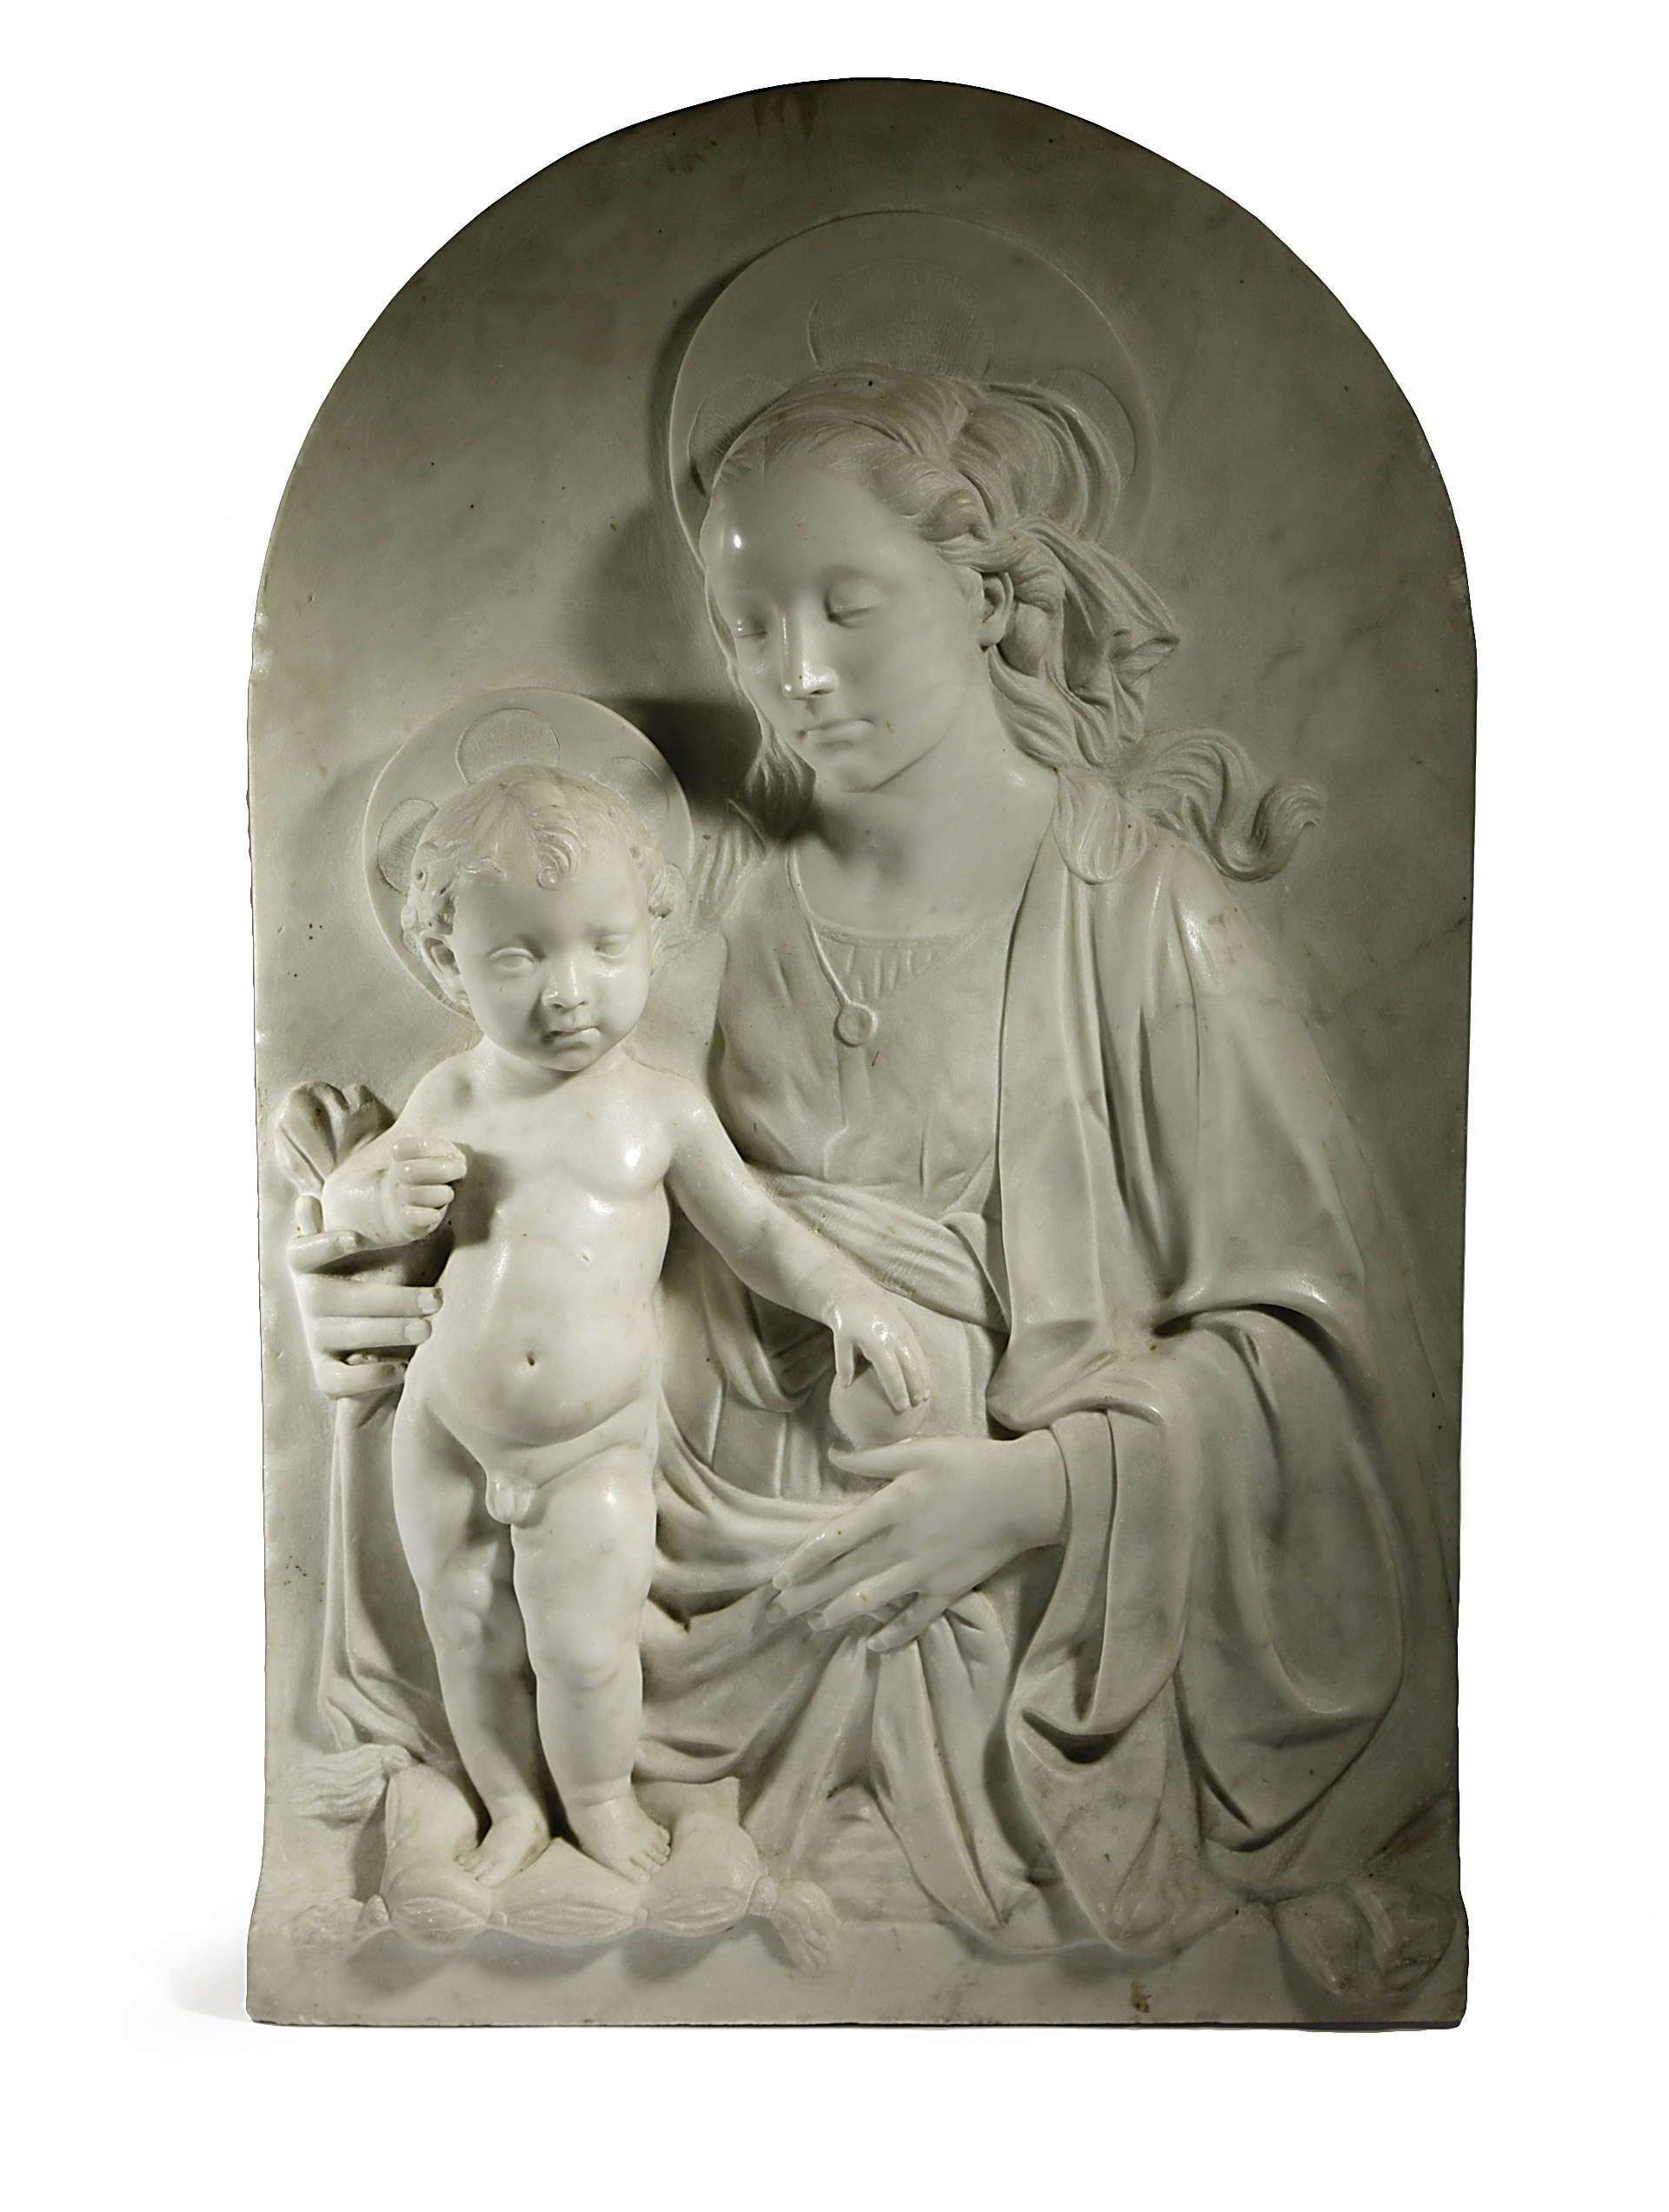 AN ITALIAN MARBLE RELIEF OF THE MADONNA AND CHILD AFTER VERROCCHIO, ATTRIBUTED TO GIOVANNI